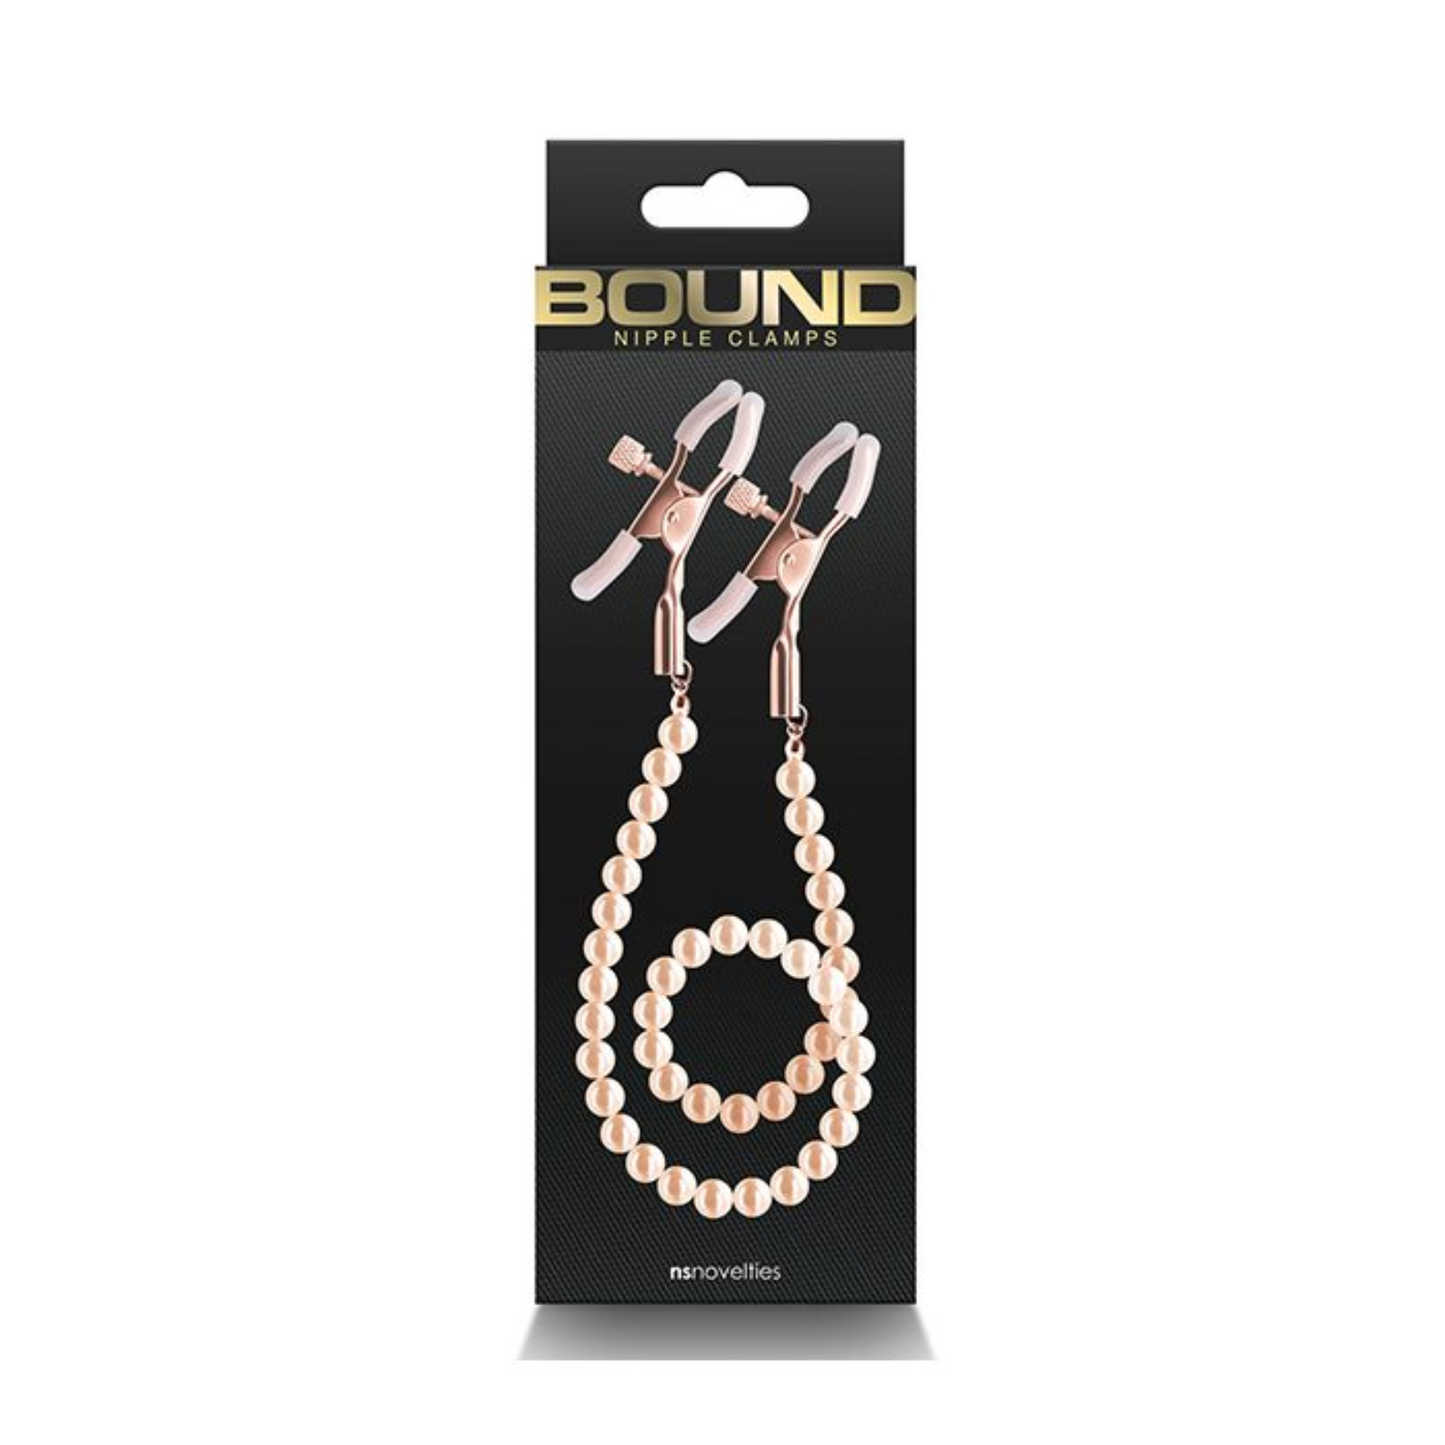 NS Novelties - Bound Nipple Clamps - Style DC1 - Rose Gold, Pink